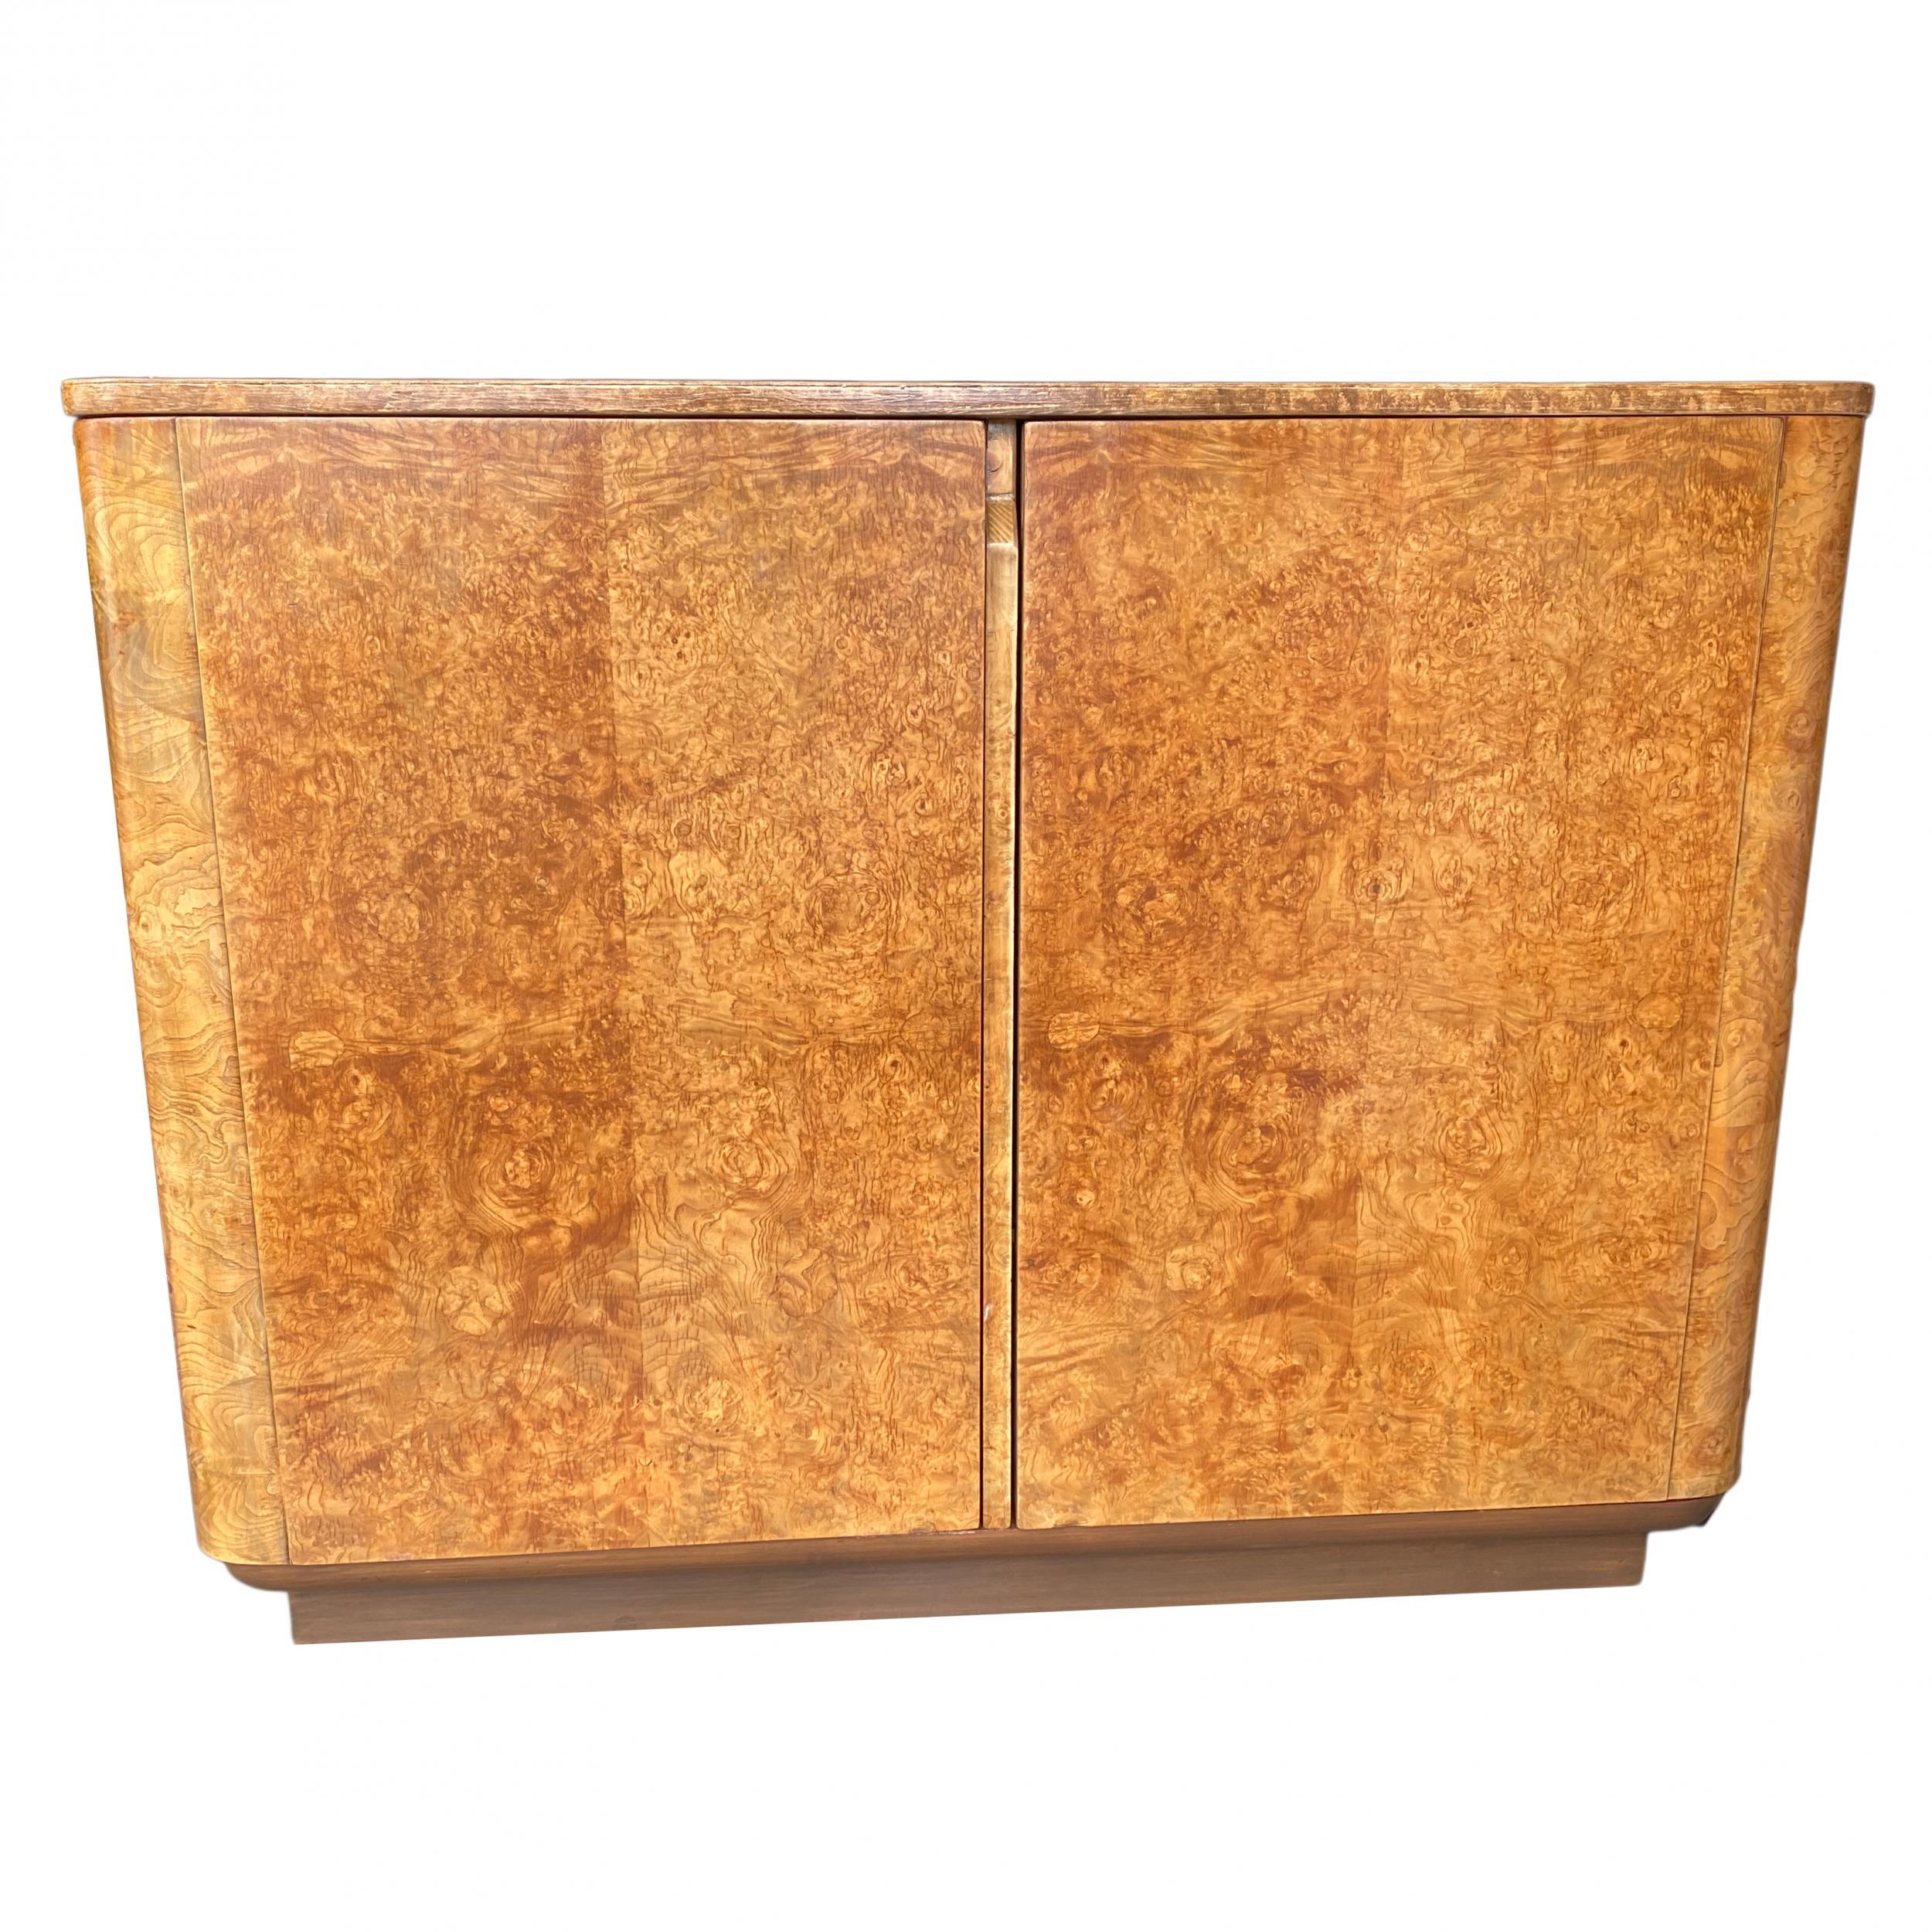 Original 1930s English Art Deco burl wood bedroom cabinet featuring 3 adjustable shelves and 2 adjustable drawers with tie holder attached to the door.
We have a pair available.